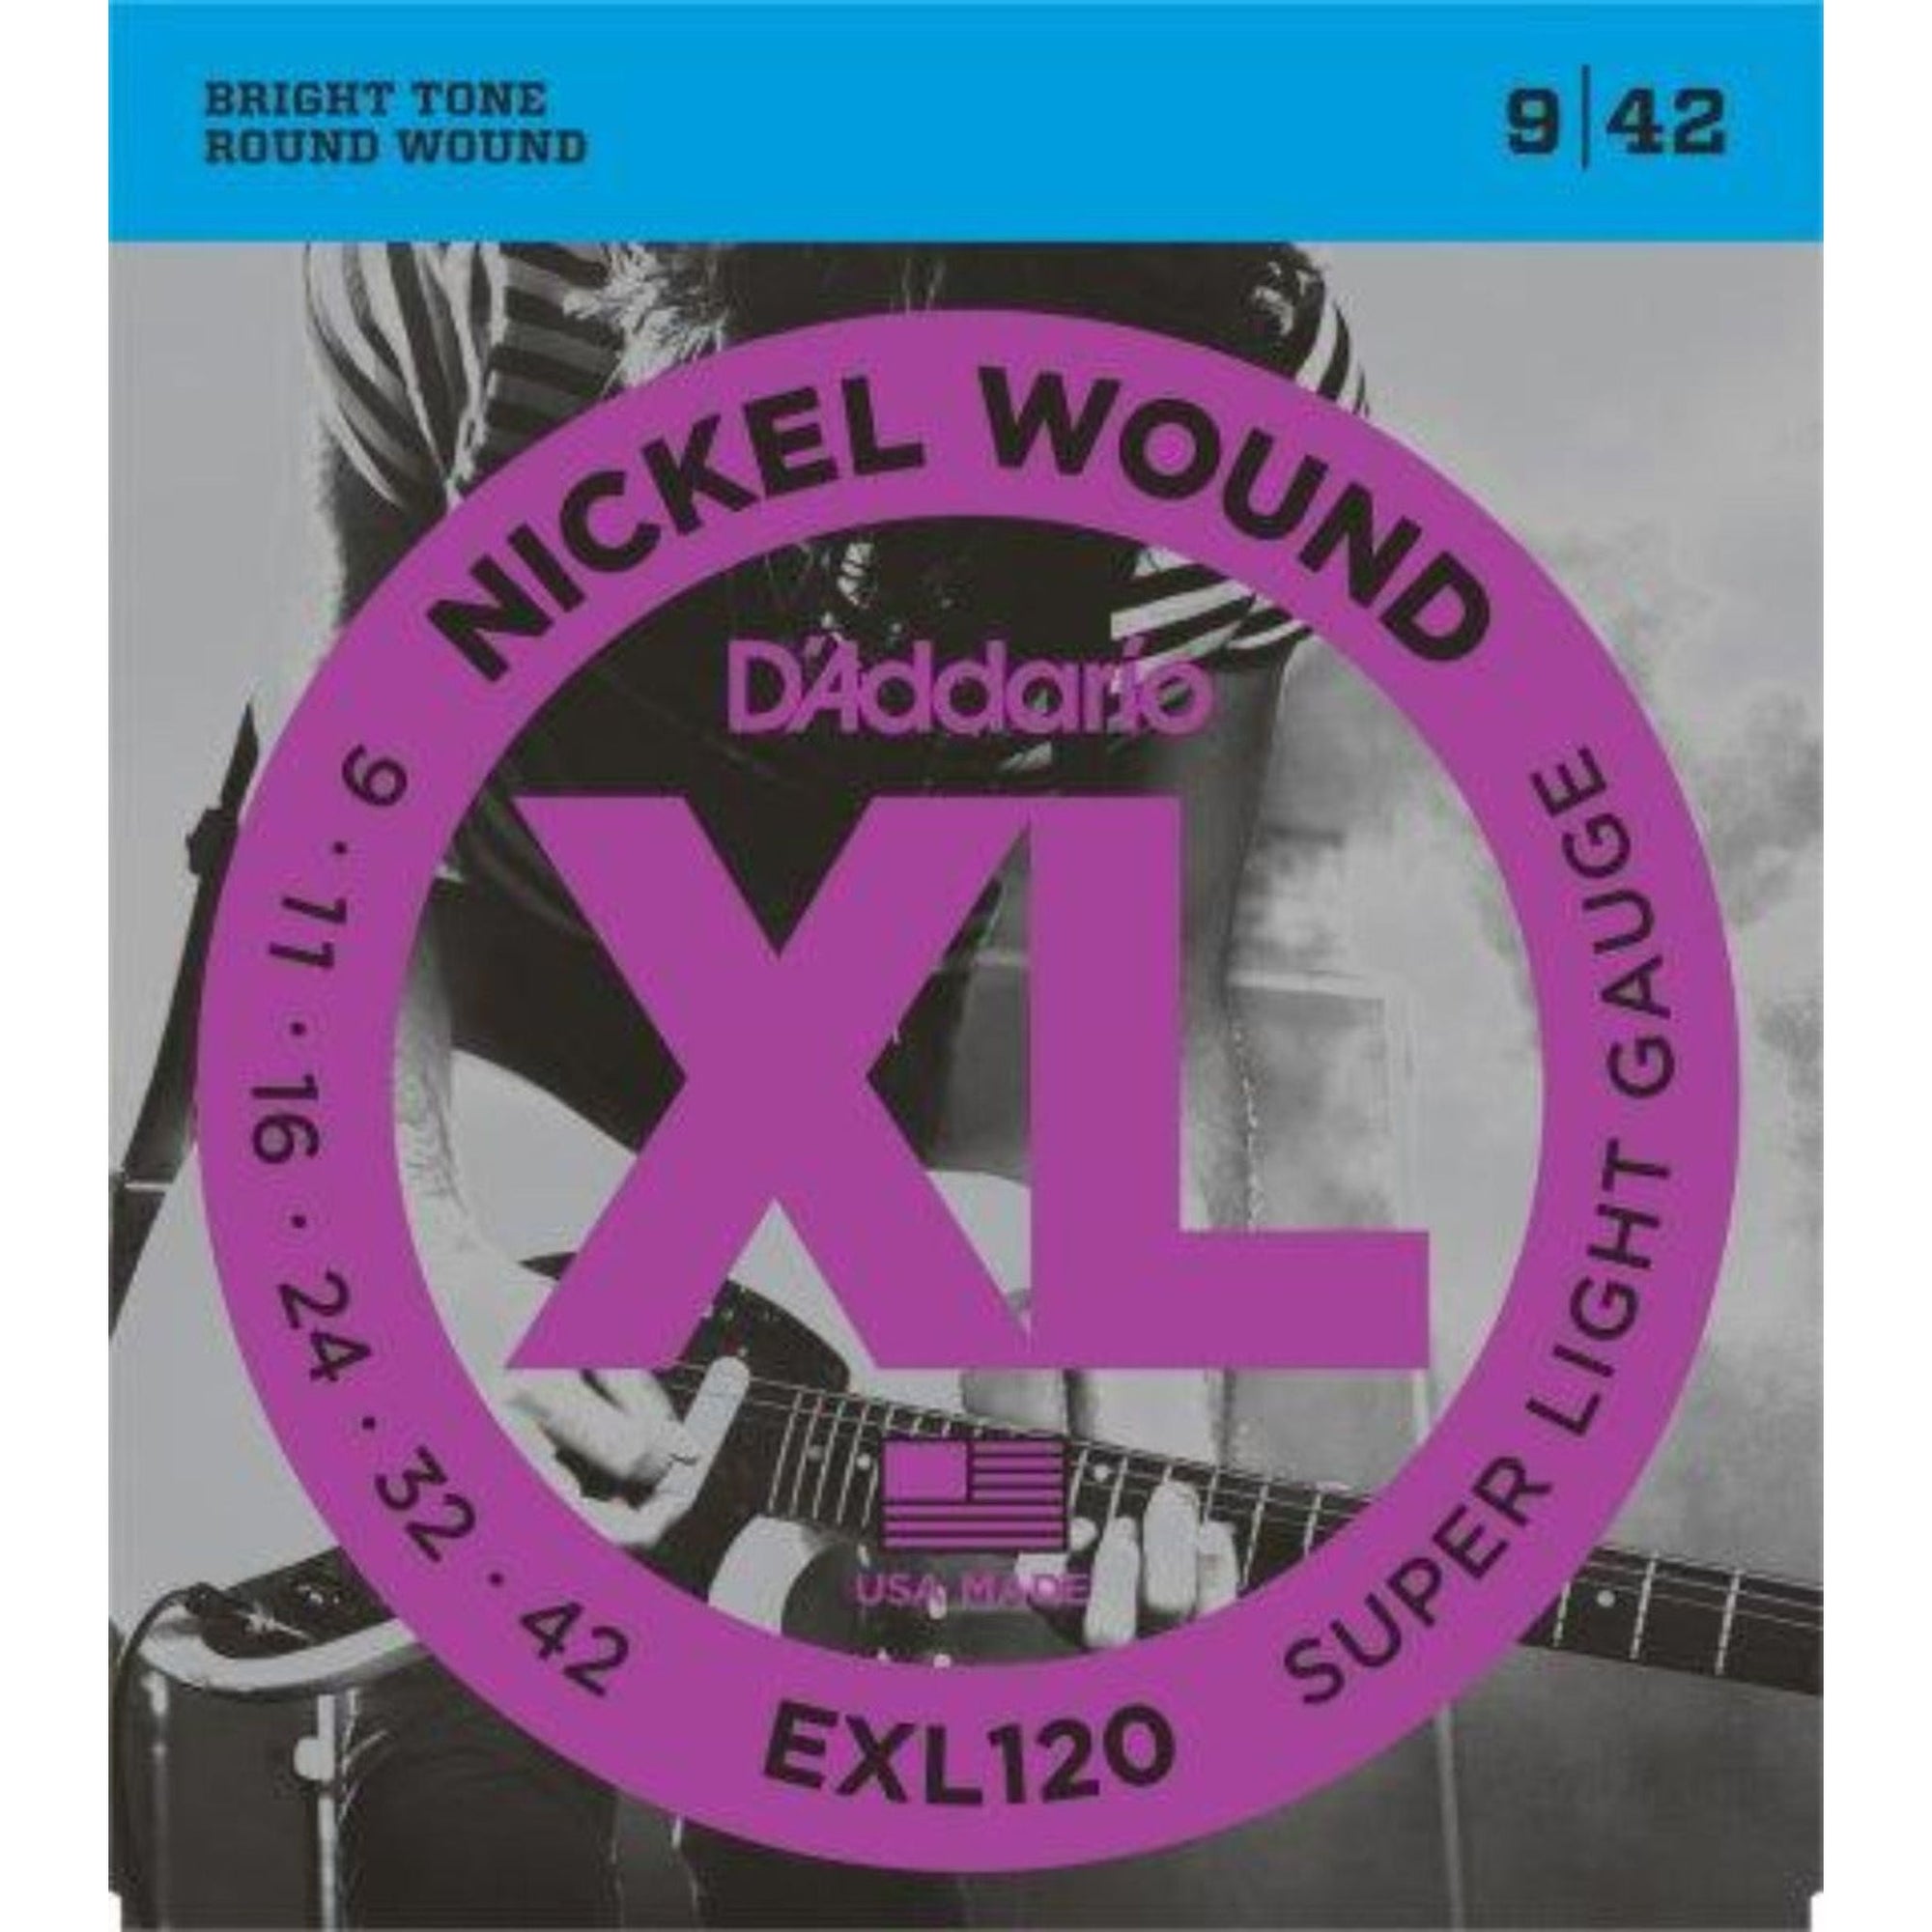 The D'Addario EXL120 Electric Guitar Strings are one of D'Addario's best selling sets, delivers super flexibility and biting tone. A standard for many electric guitars.